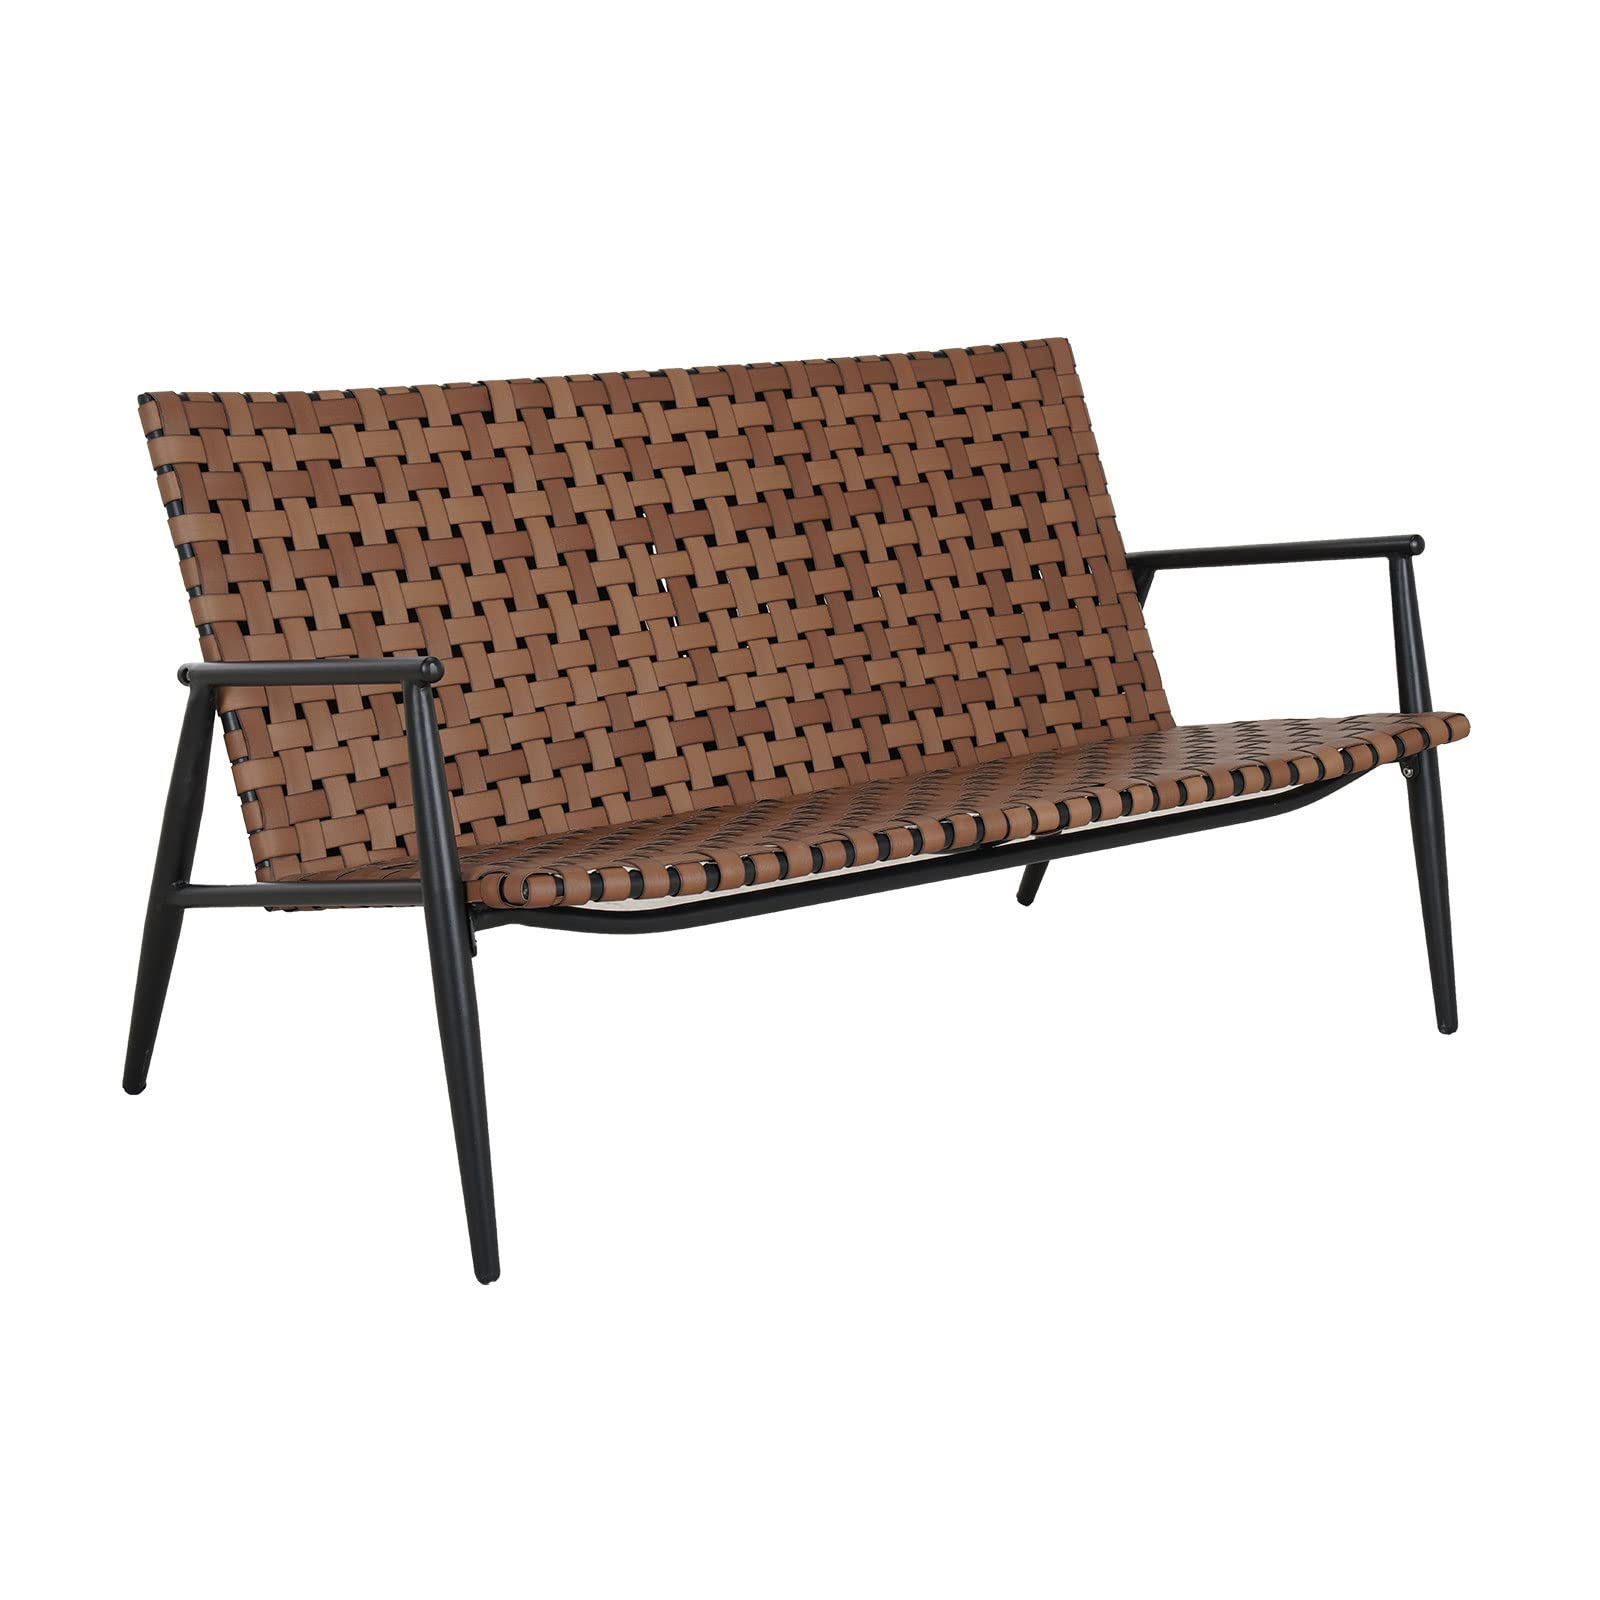 Outdoor/Indoor Aksel Series Conversation Loveseat, All Weather Leather-Look Wicker Outdoor Powder Coated Aluminum Frame 2-Seat Sofa